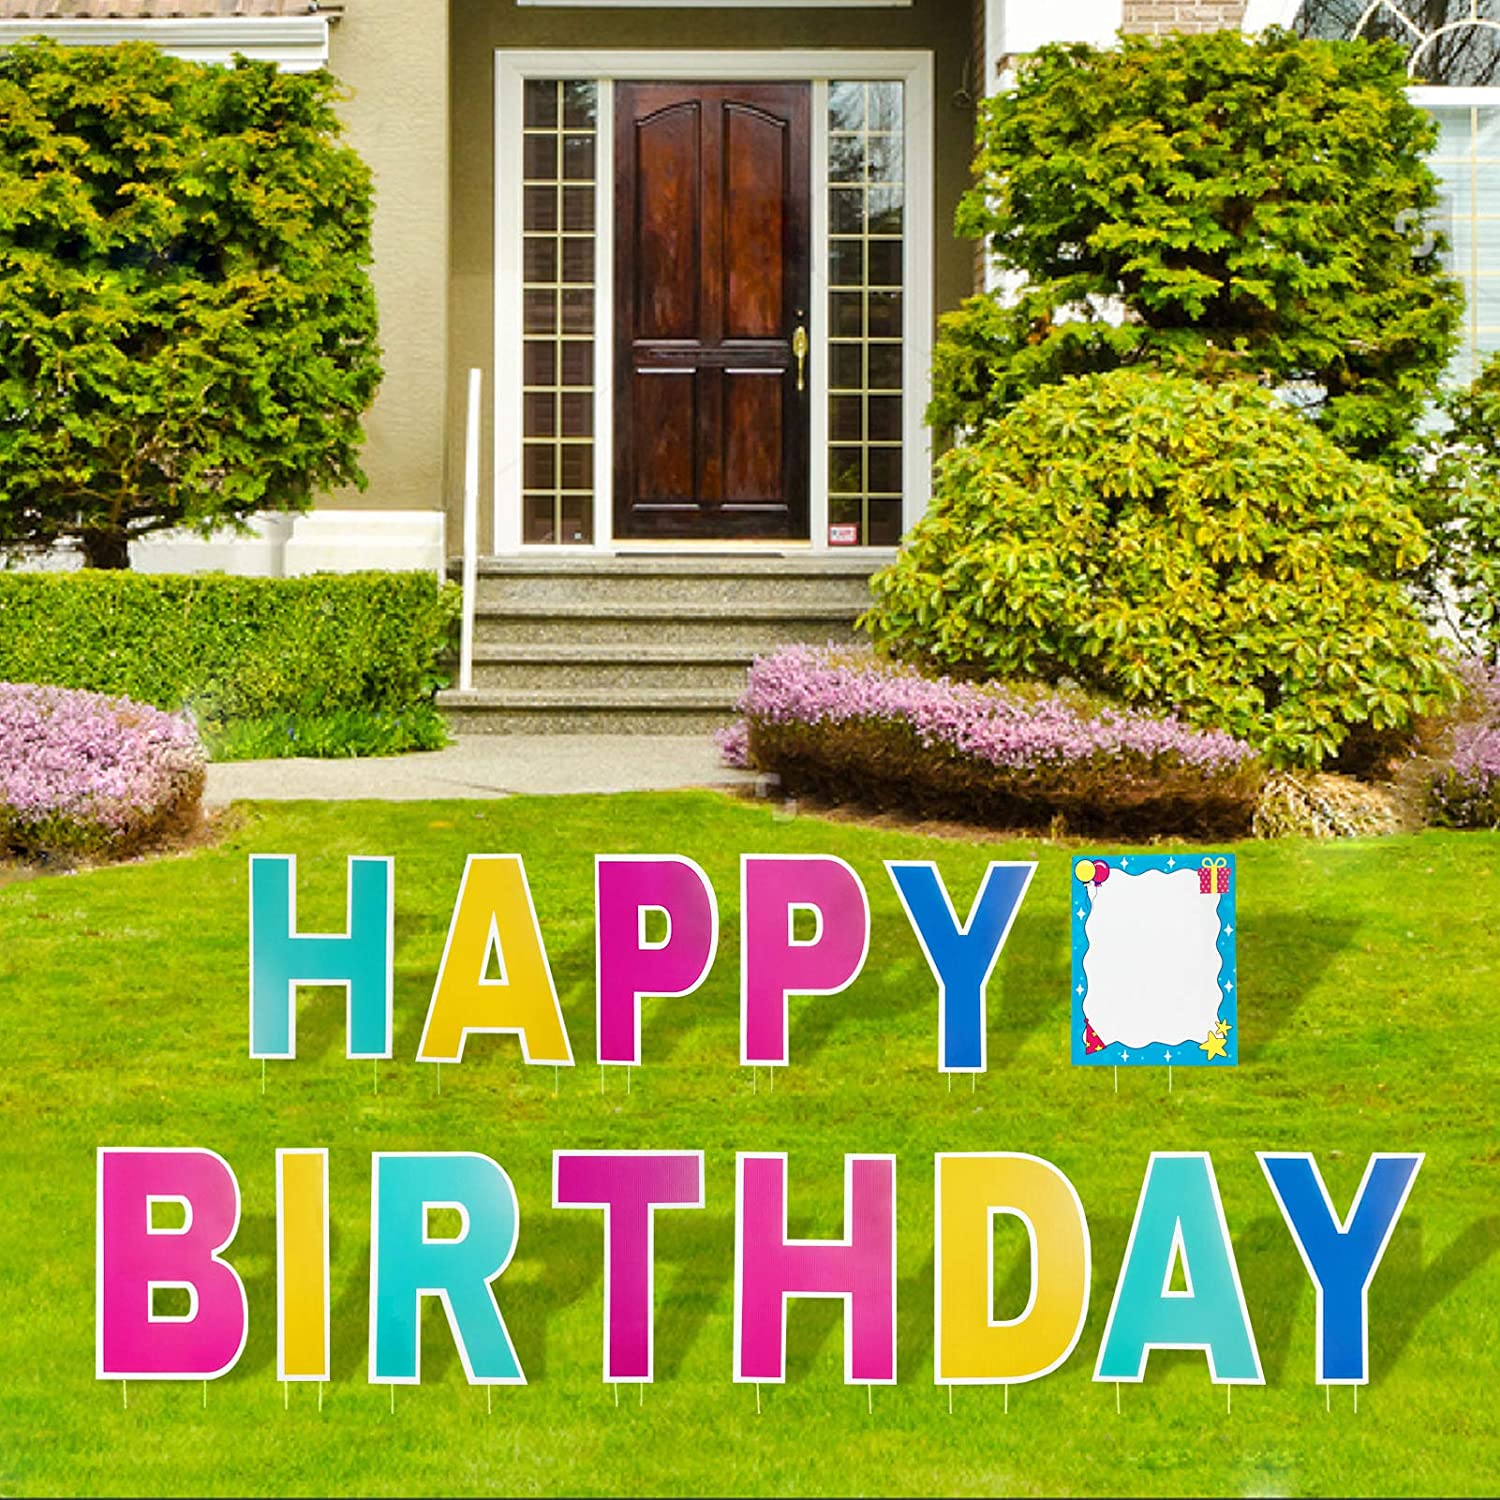 100% Original Factory Bicycle Lawn Ornament - Happy Birthday Yard Sign 16 Inch Birthday Letters Lawn Sign Colorful Birthday Yard Decoration with Stakes Cake Balloon Waterproof Garden Lawn Decor fo...